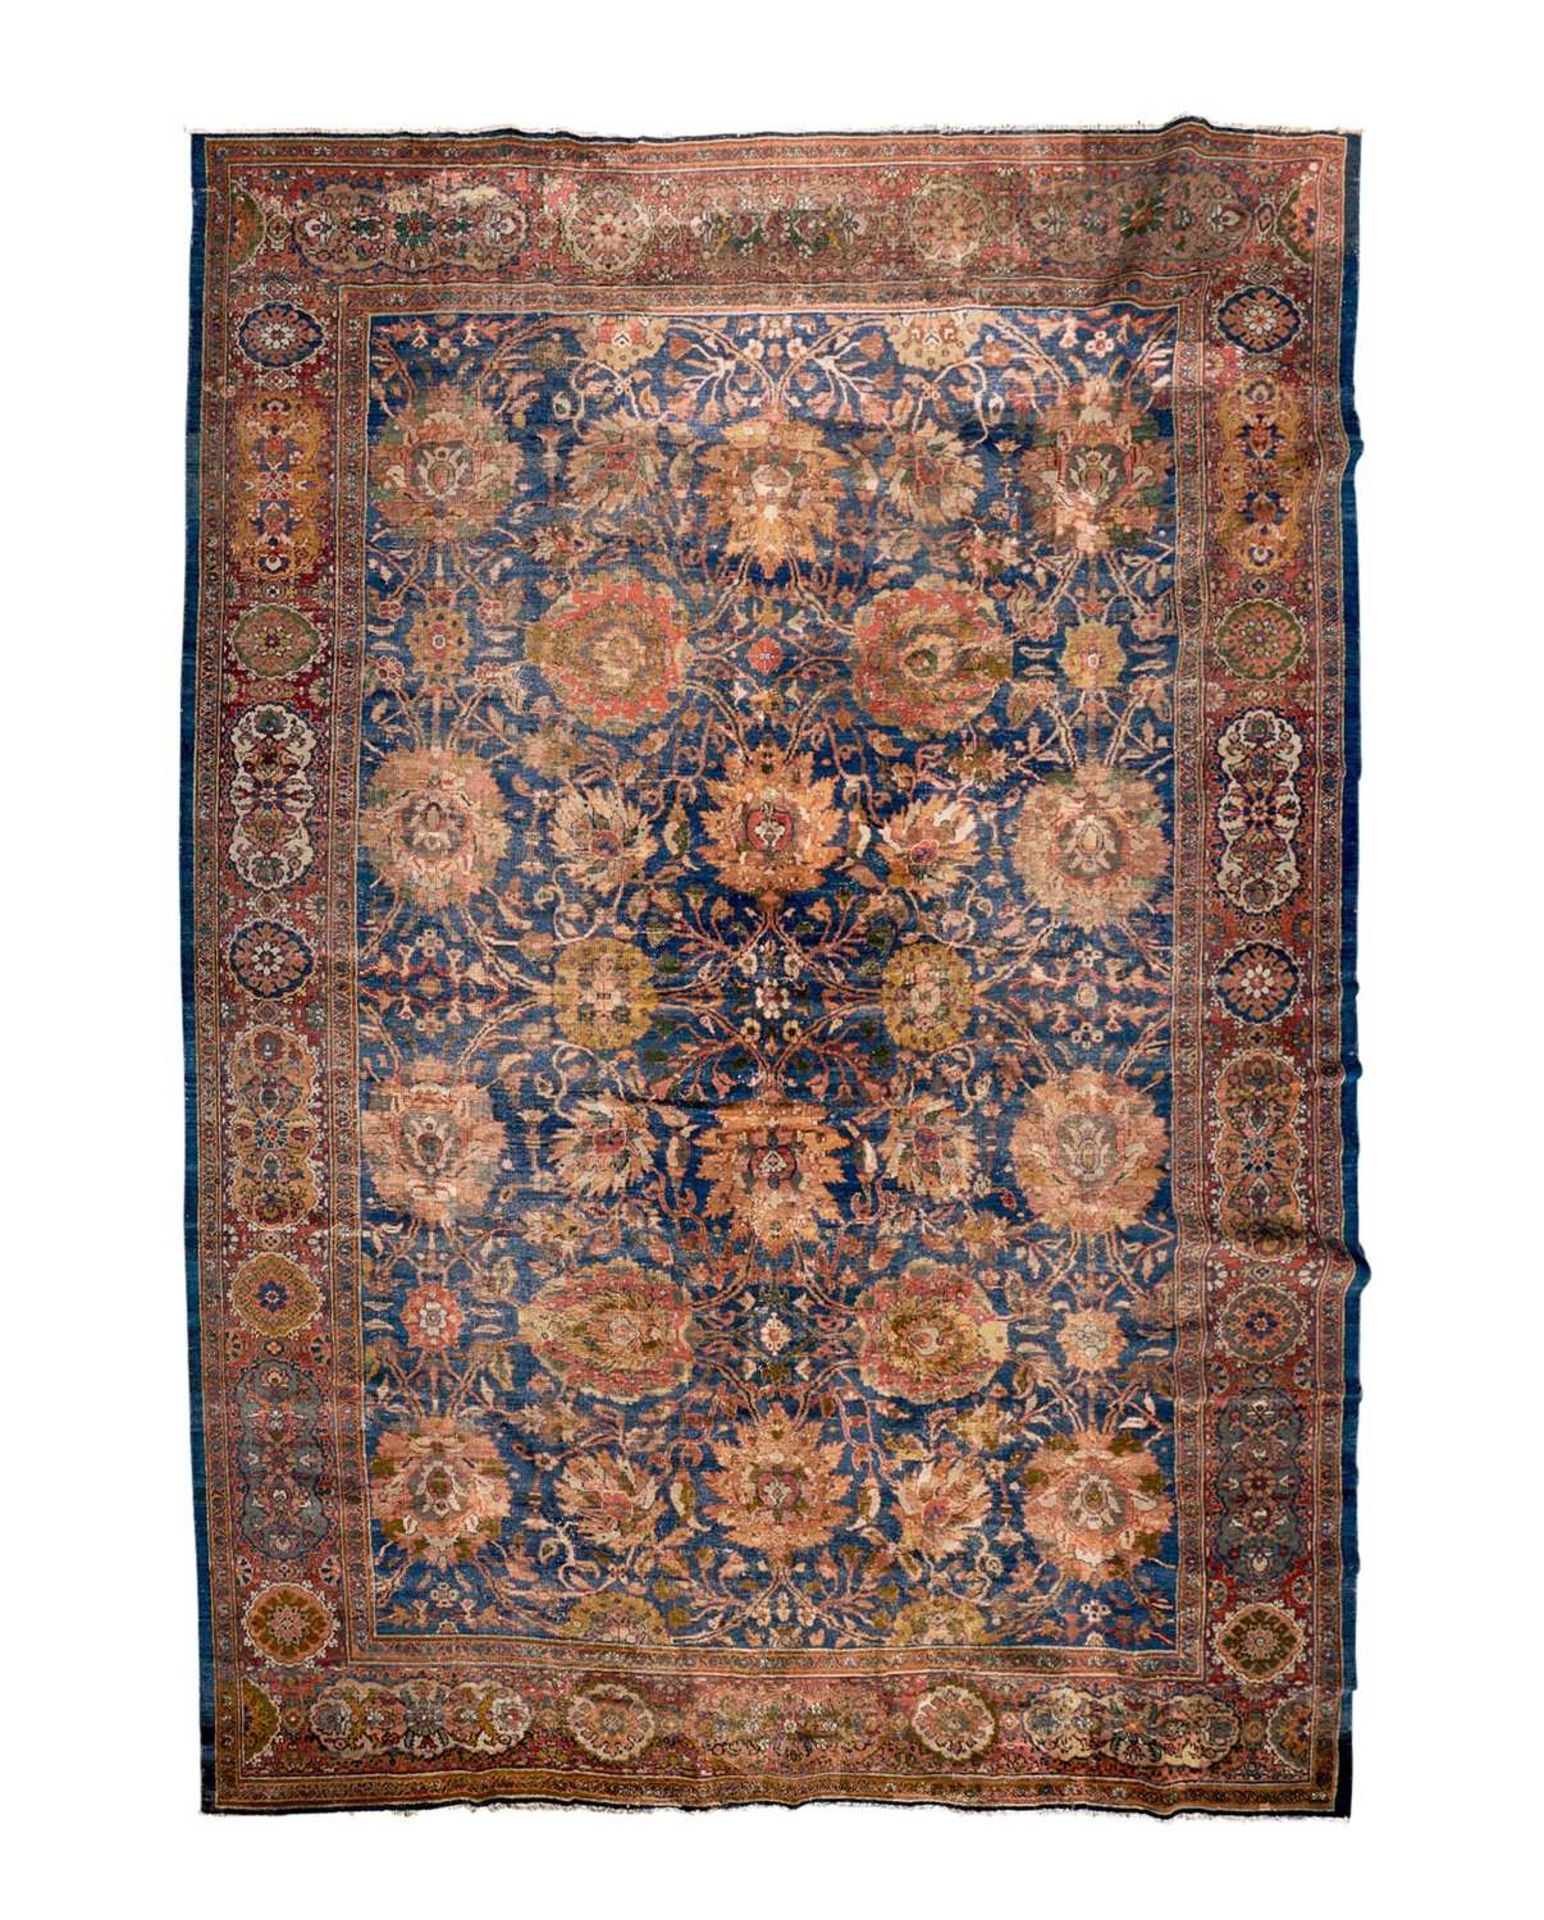 A RARE AND LARGE LATE 19TH CENTURY PERSIAN ZIEGLER CARPET